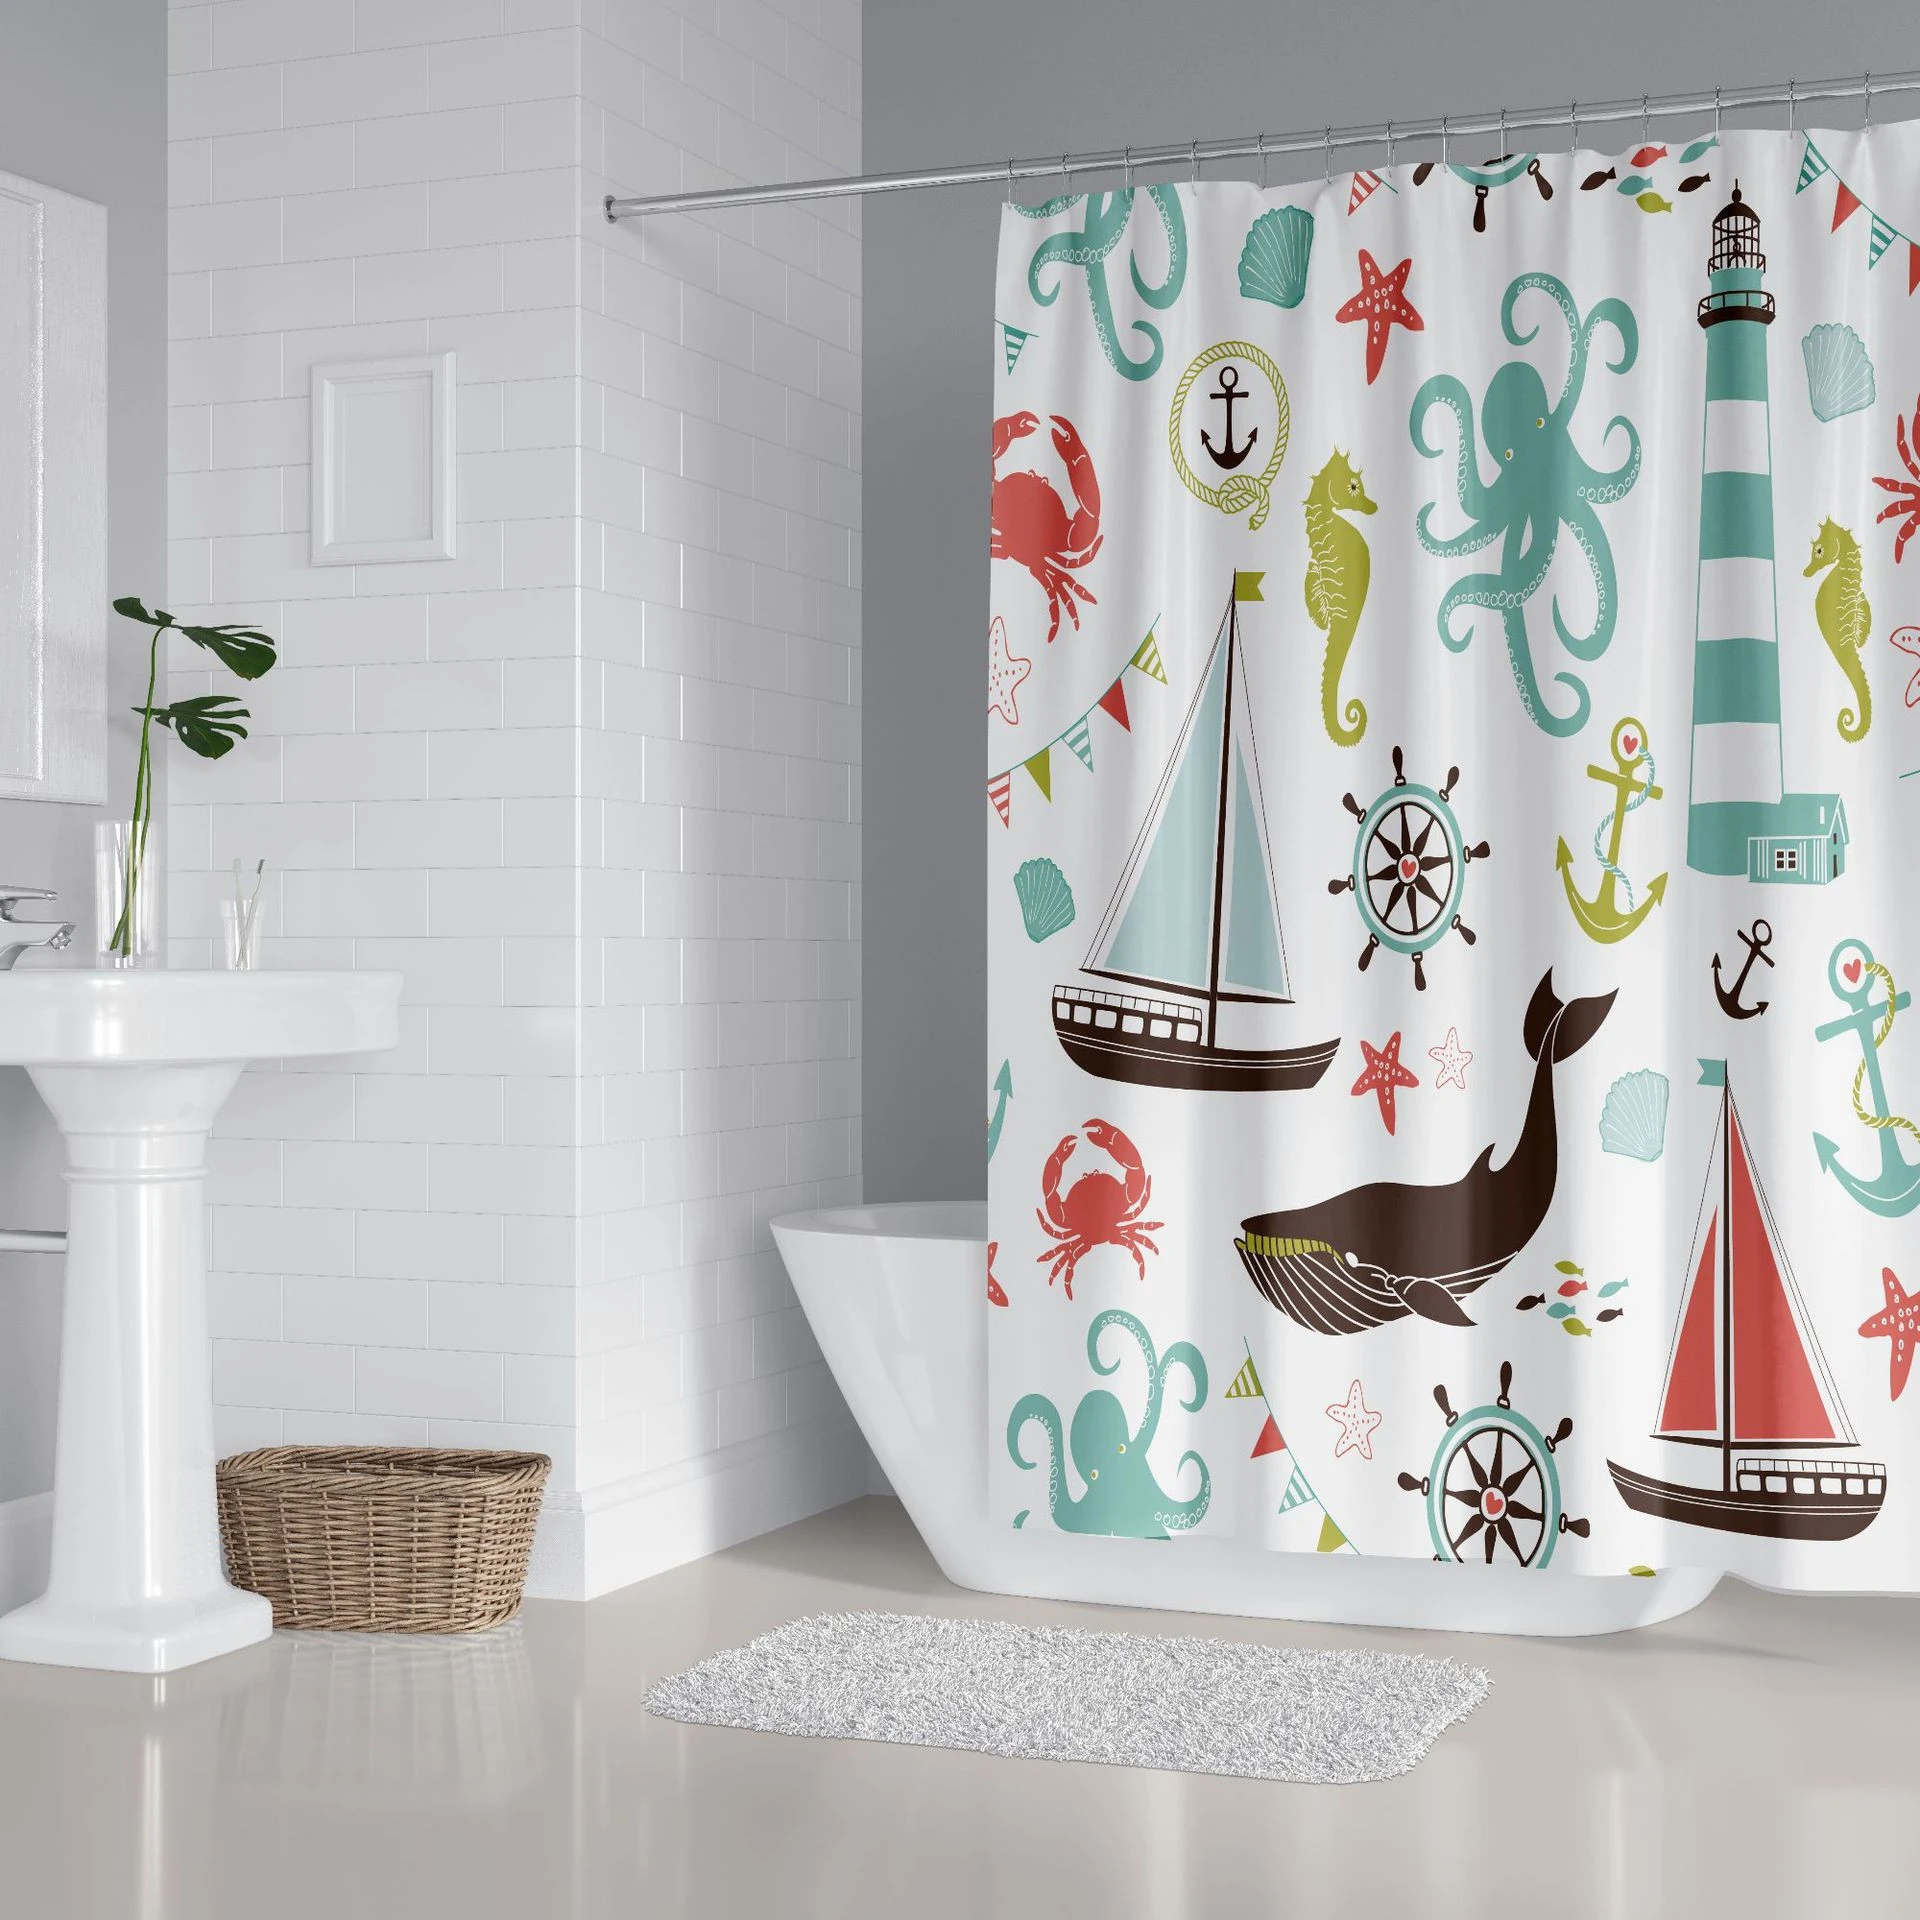 Bathroom Sets with Shower Curtain and Rugs and Acc and Bathroom Accessories Shower Curtains Design